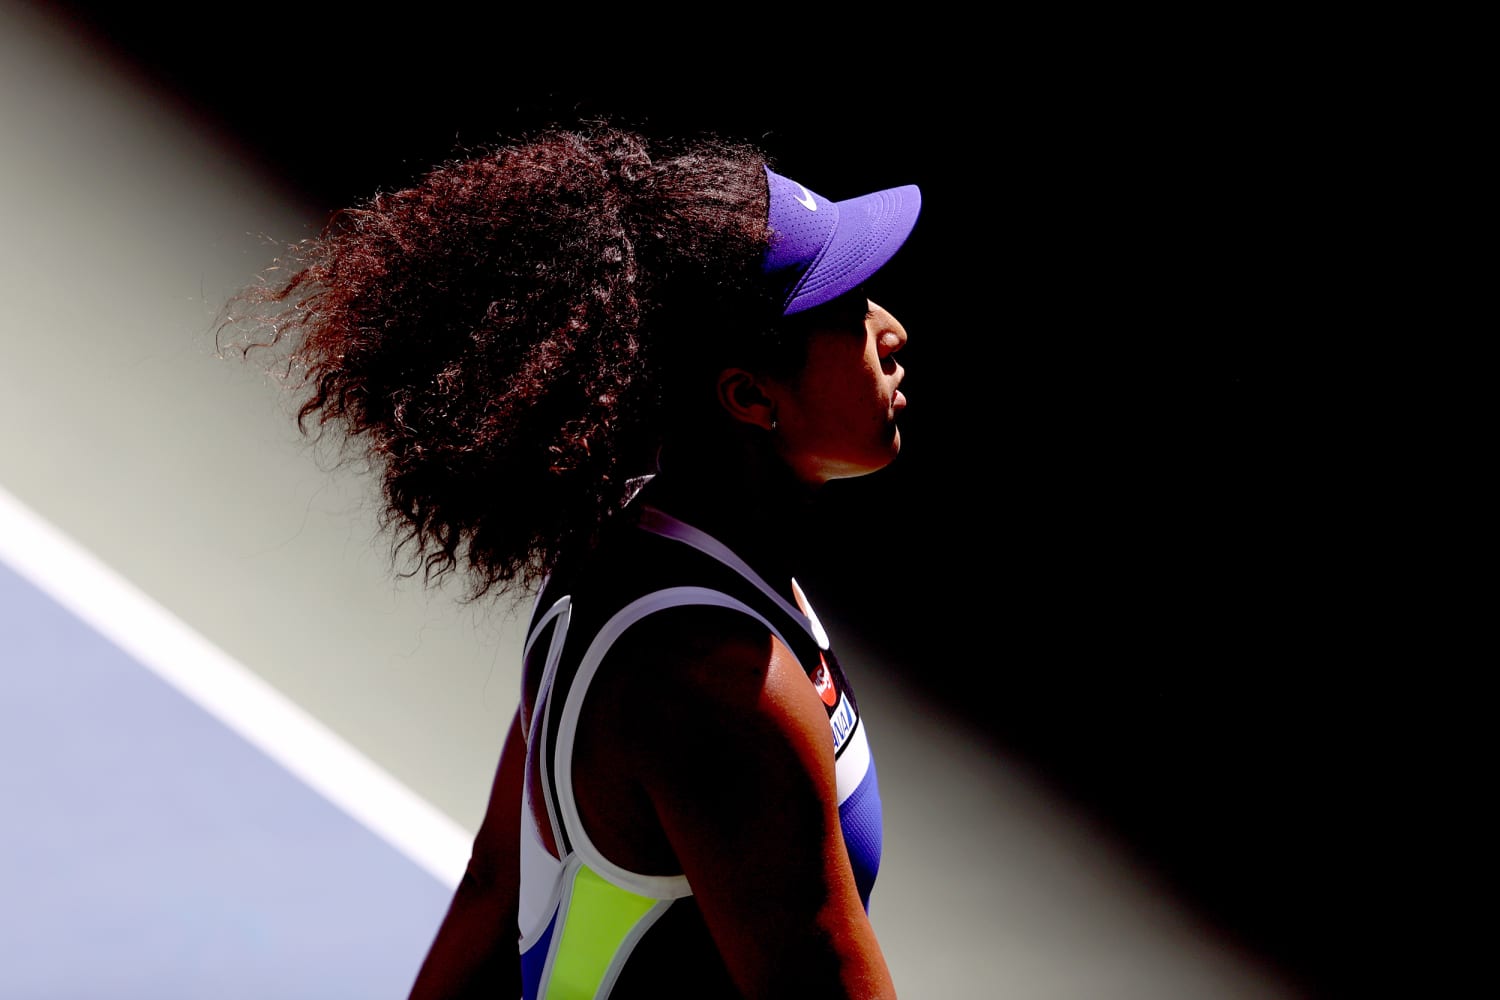 How Naomi Osaka is using masks to make statement on one of world's